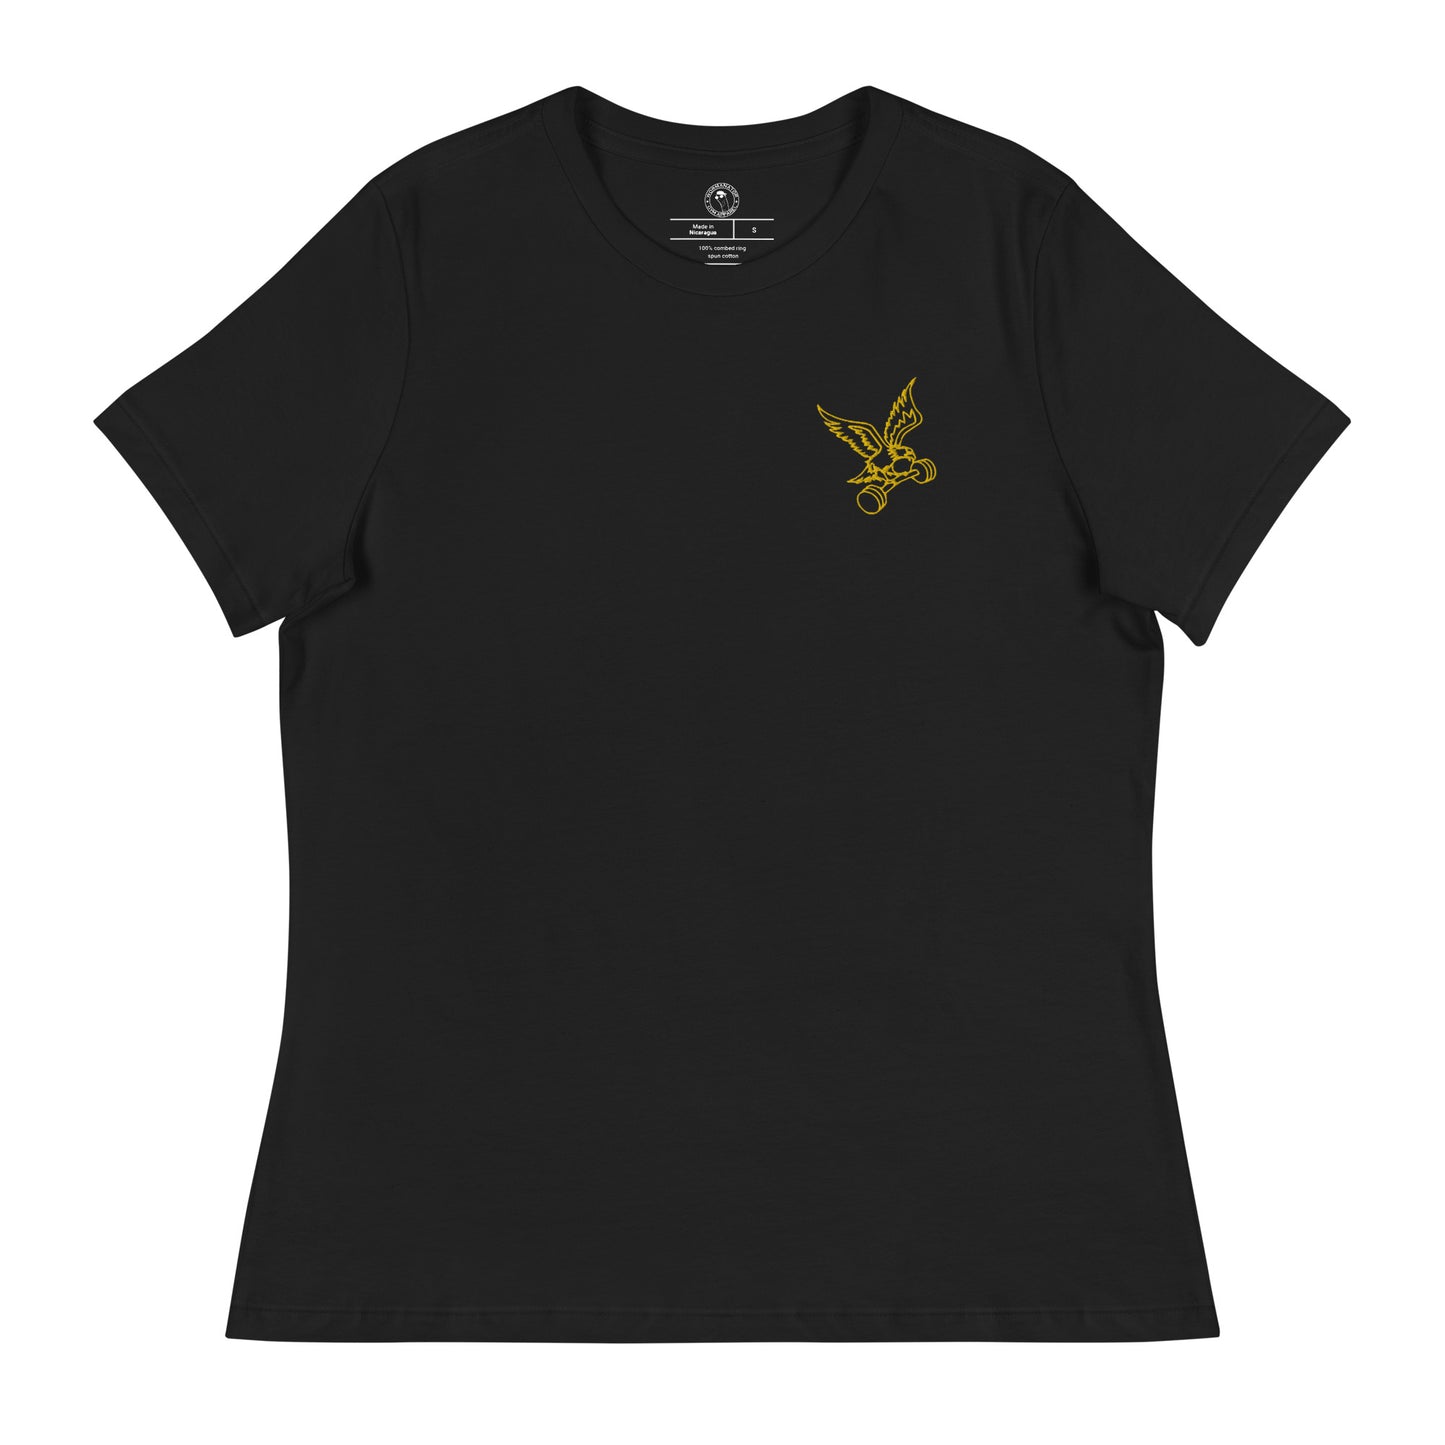 Women's Embroidered Barbell Eagle Shirt in Black